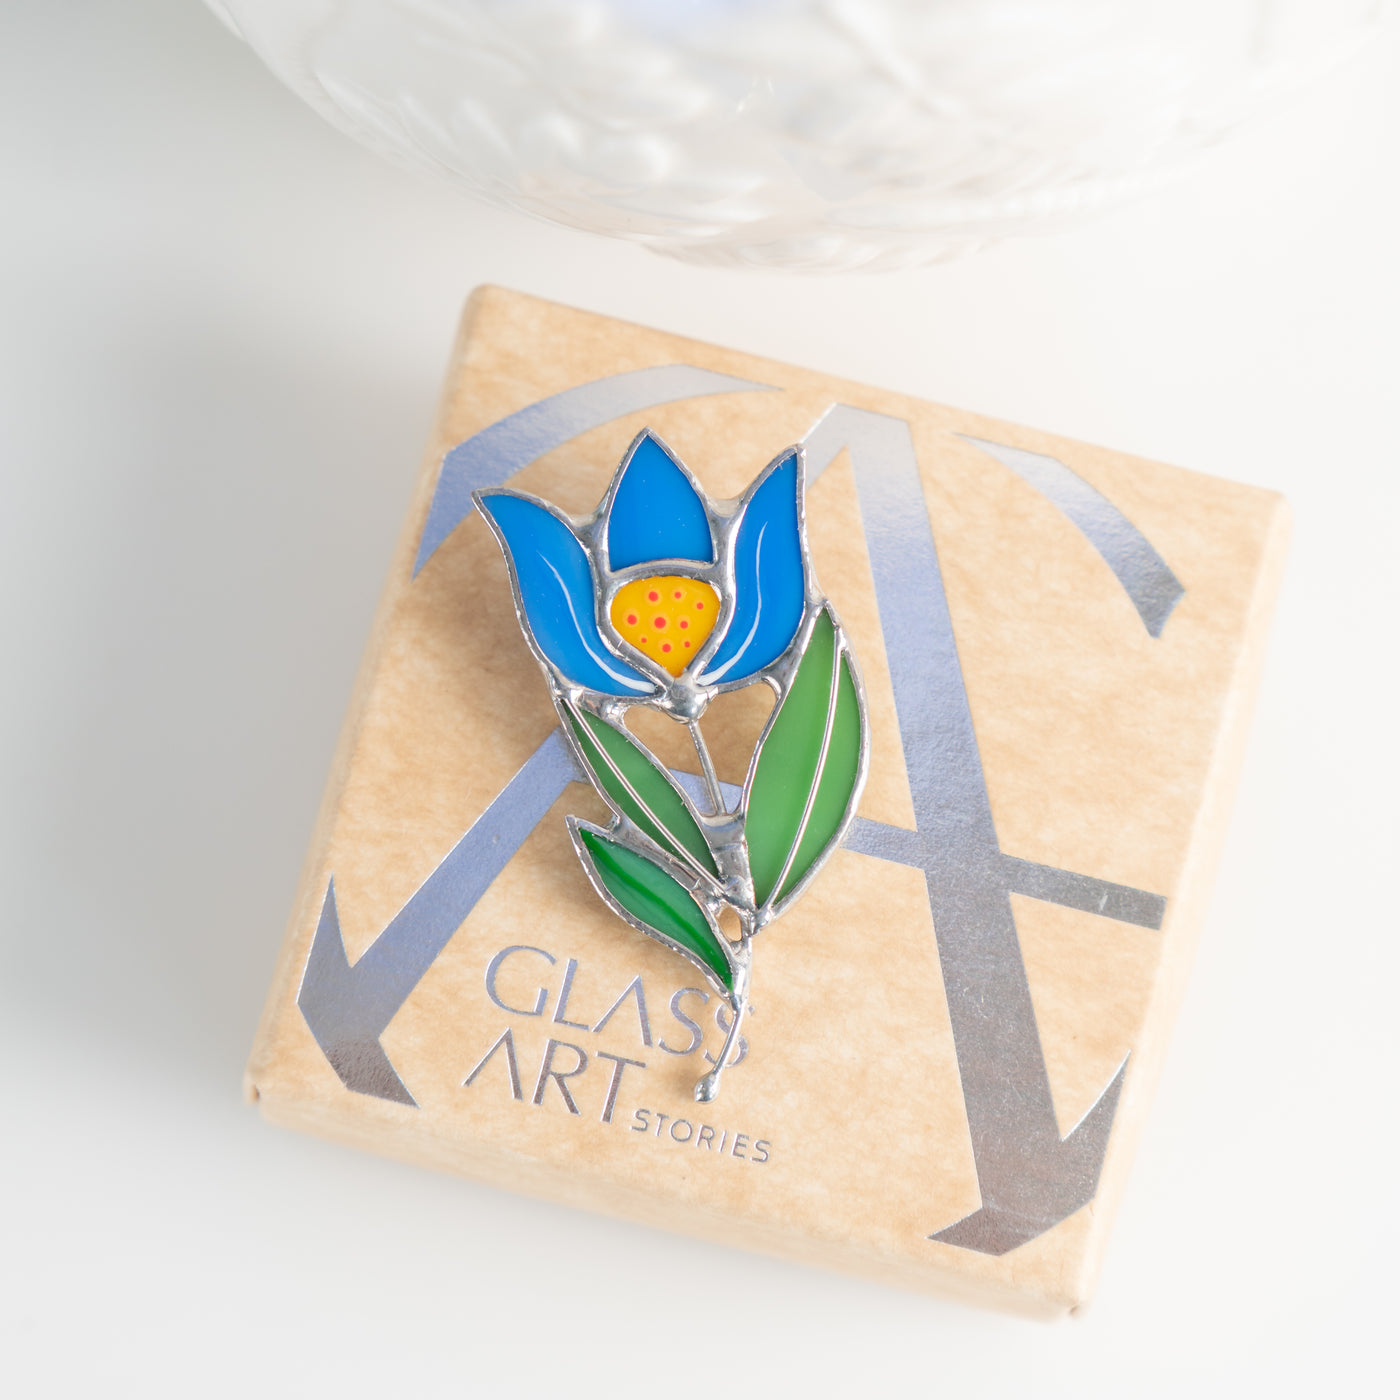 Stained glass blue anemone flower pin on a brand box